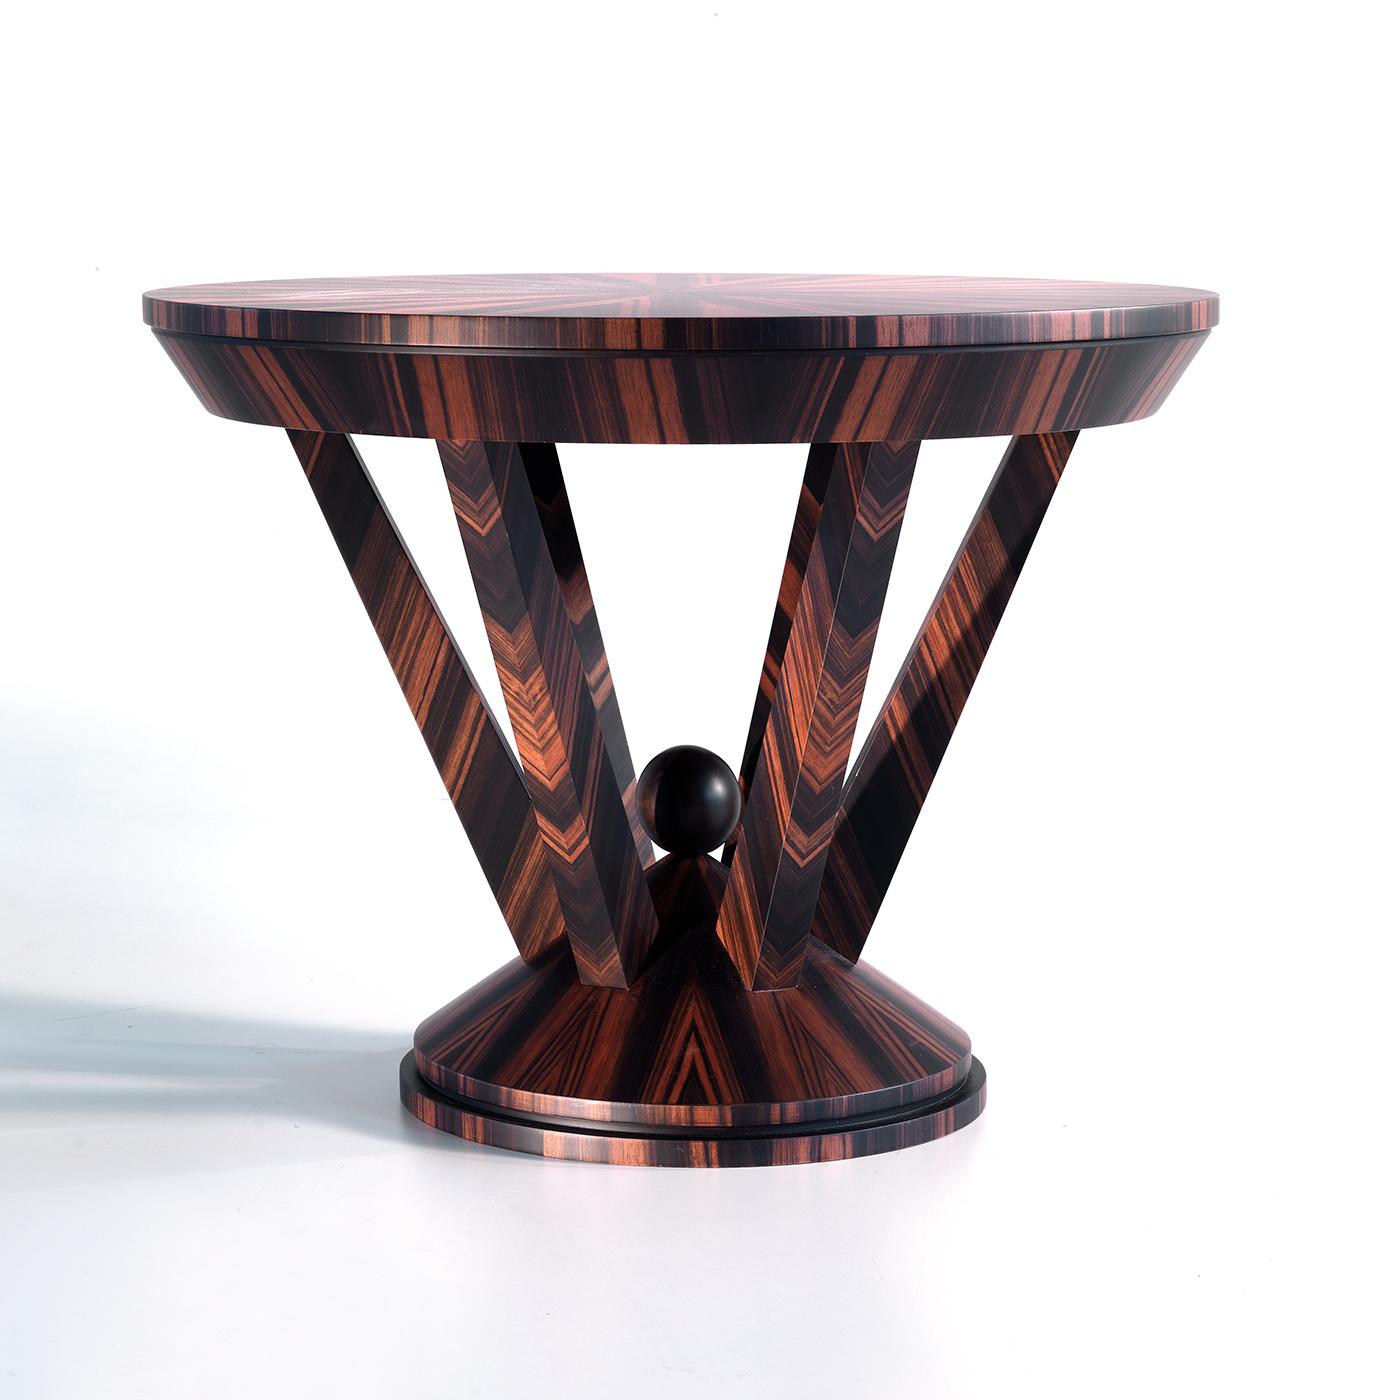 A striking design of sophisticated visual impact, this round side table flaunts a solid structure entirely crafted of prized Makassar ebony. Its bold silhouette comprises a conical base enlivened by a spherical finial and a round top connected by